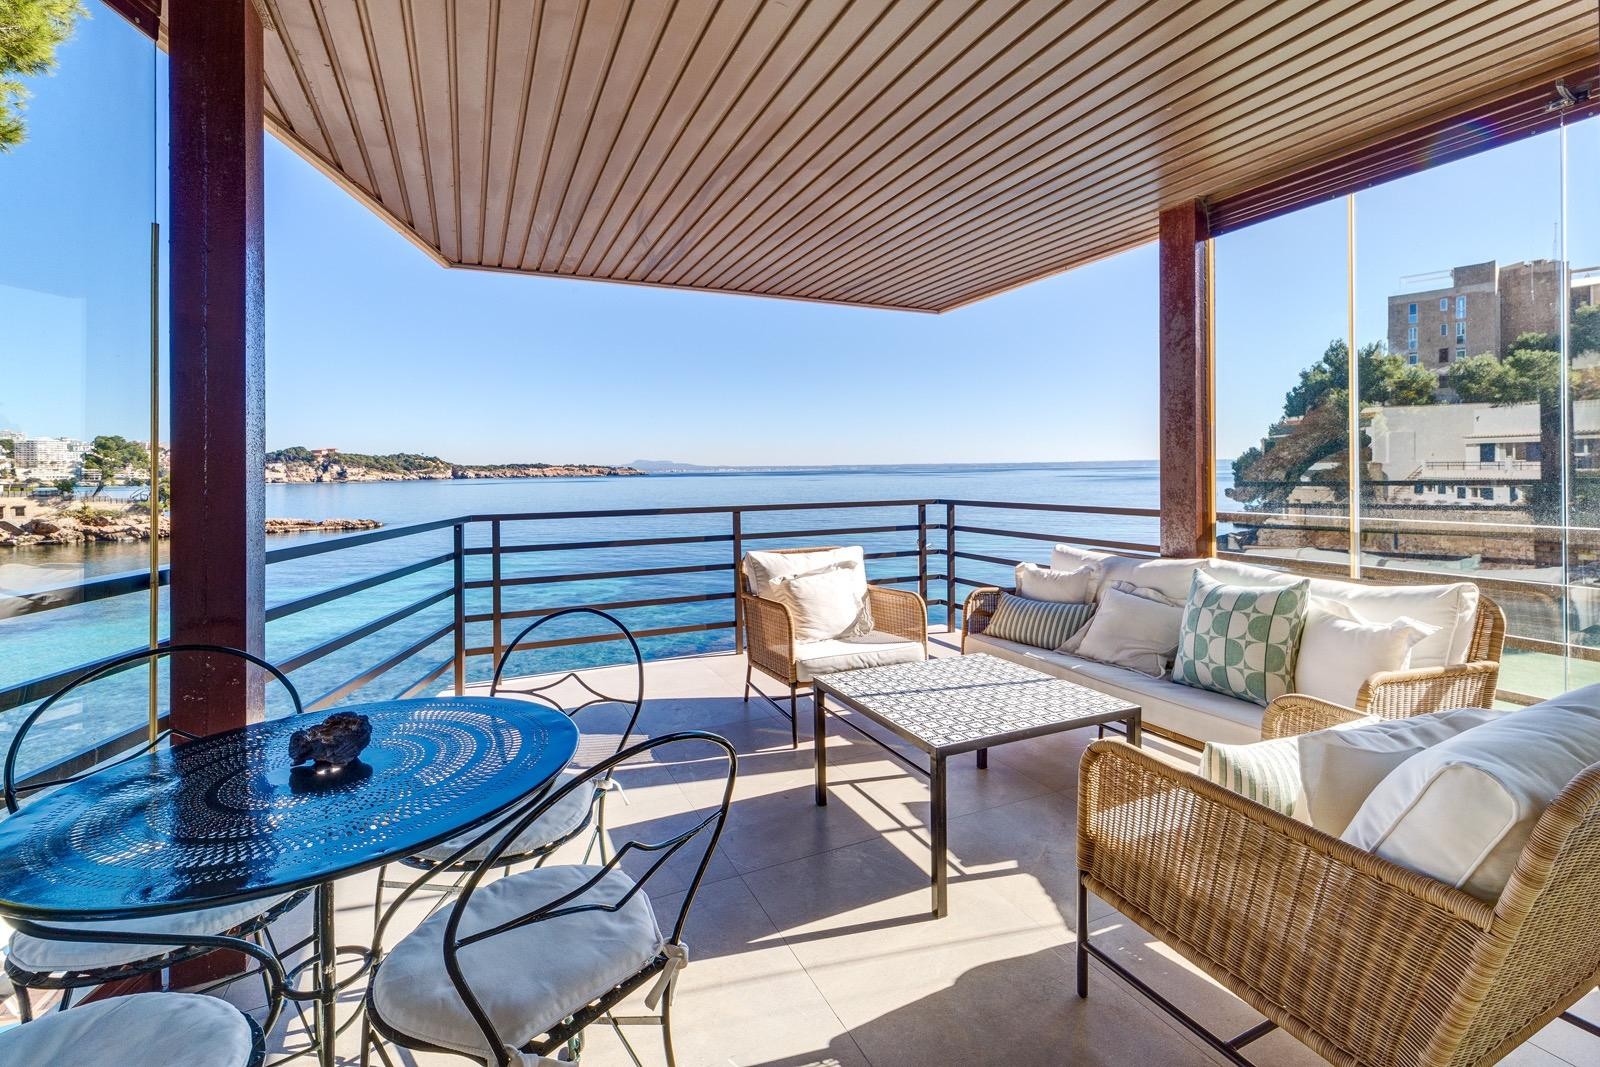 Excellent modern flat with stunning sea views and direct access to beautiful beaches.